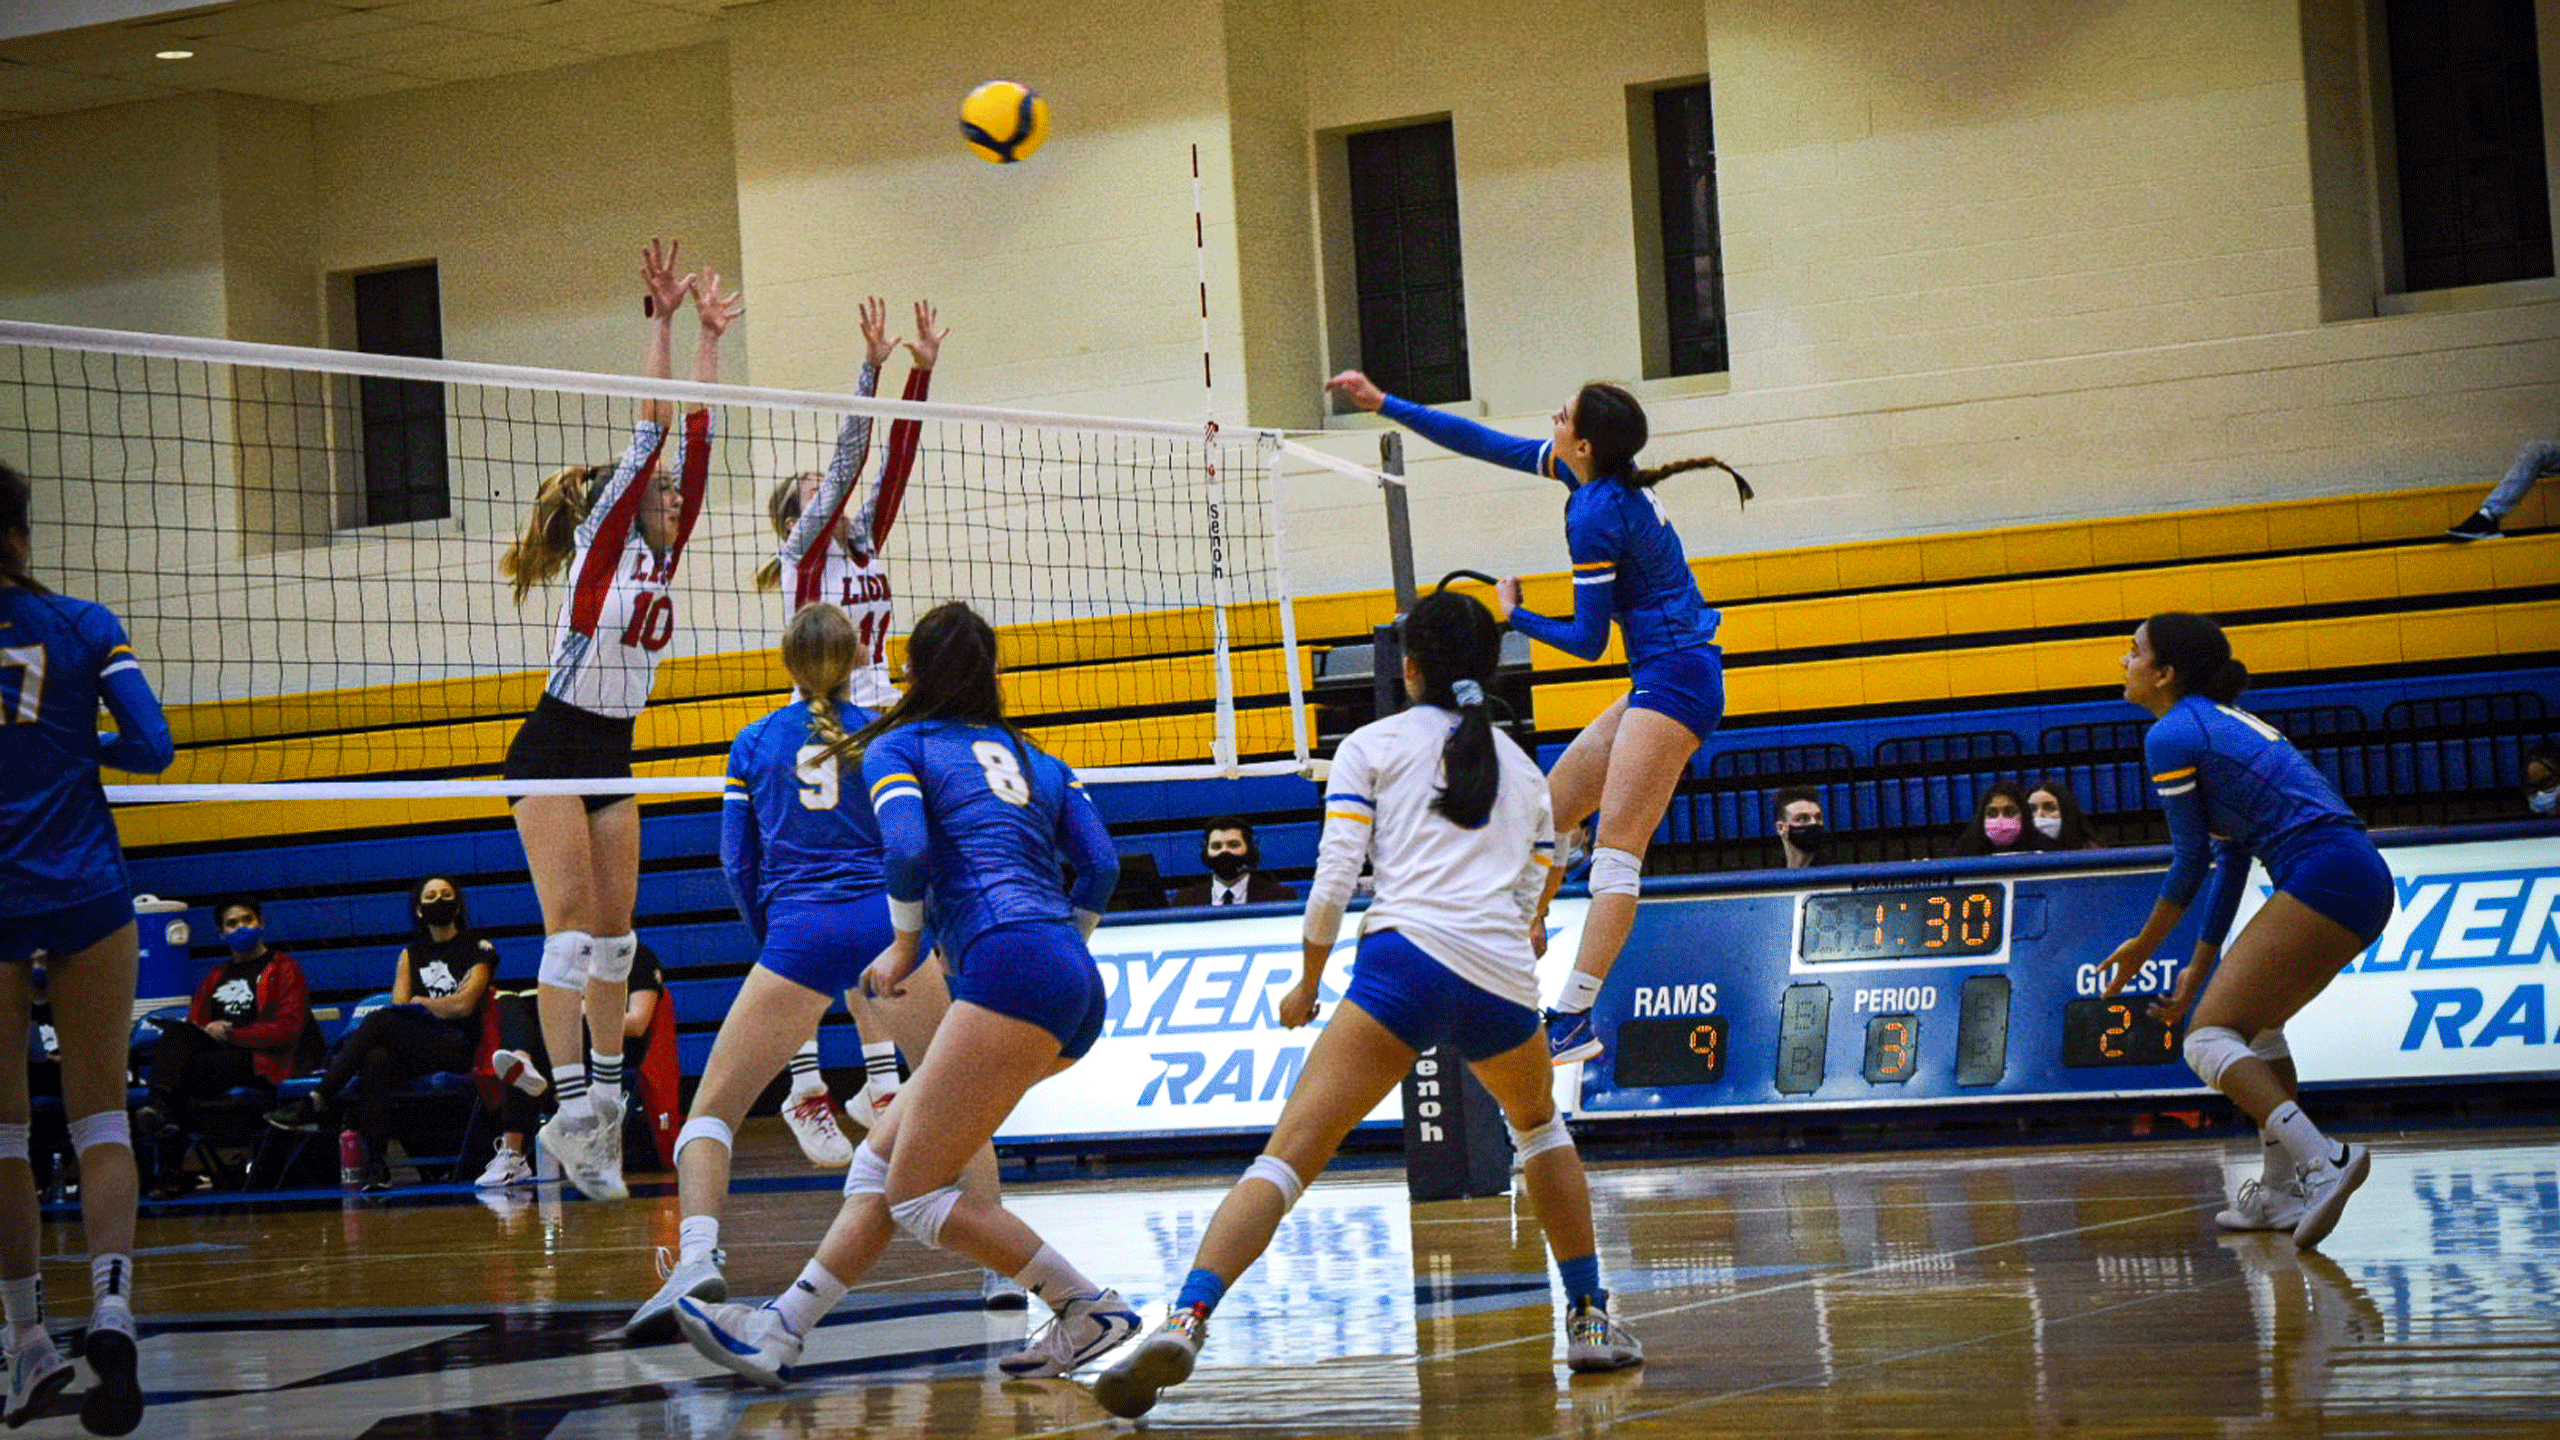 The Rams women's volleyball team attempt to clear the net